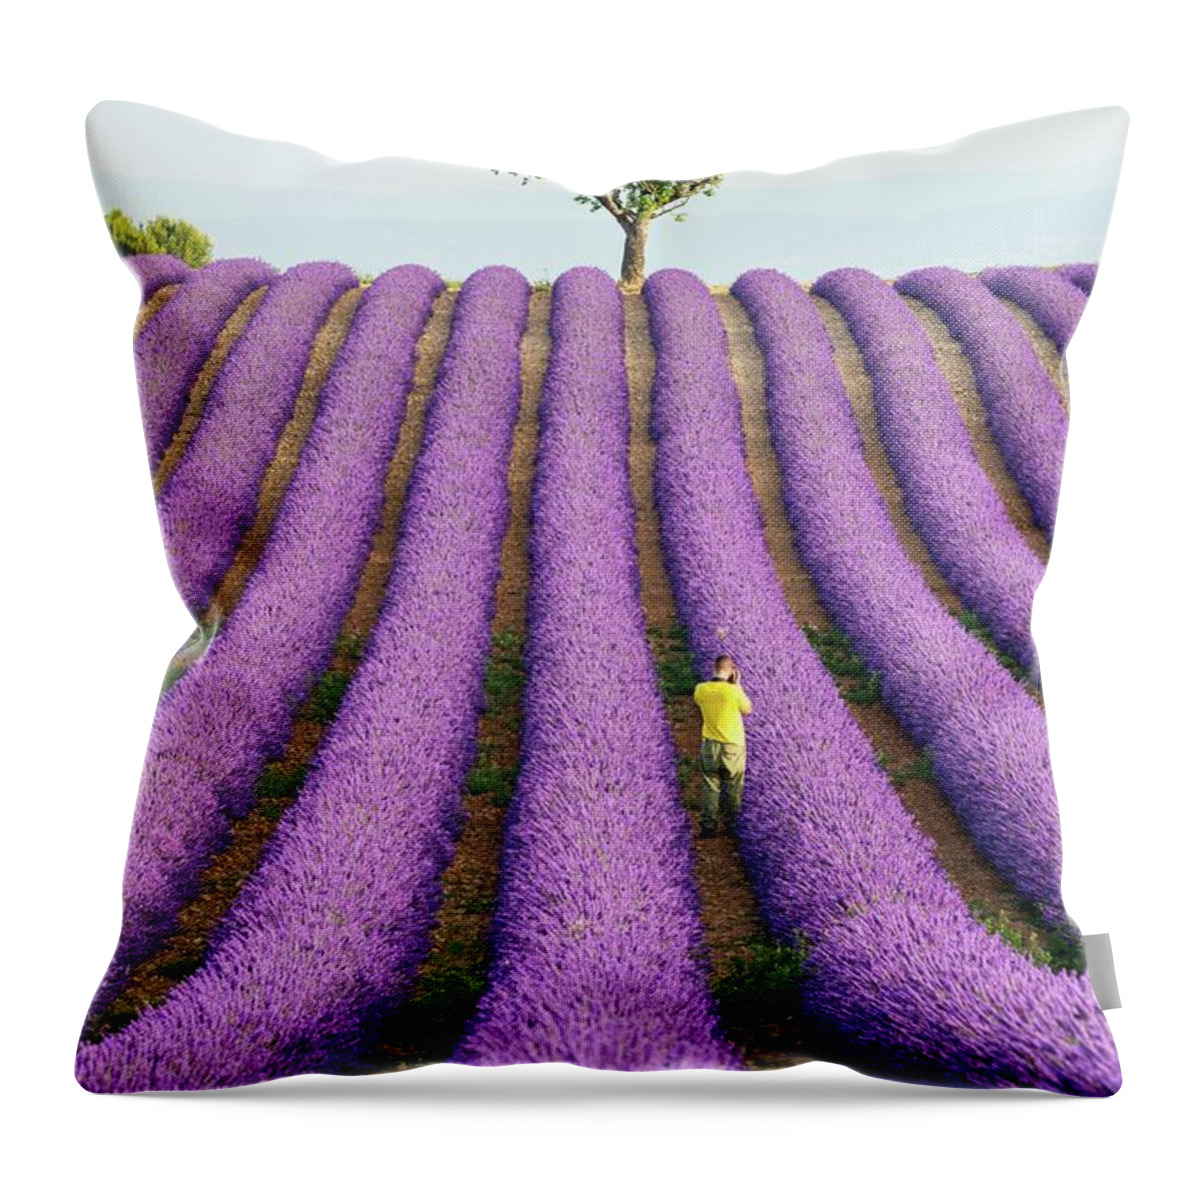 Estock Throw Pillow featuring the digital art France, Provence-alpes-cote D'azur, Valensole, Man Taking A Picture In A Lavender Field On The Plateau by Jordan Banks